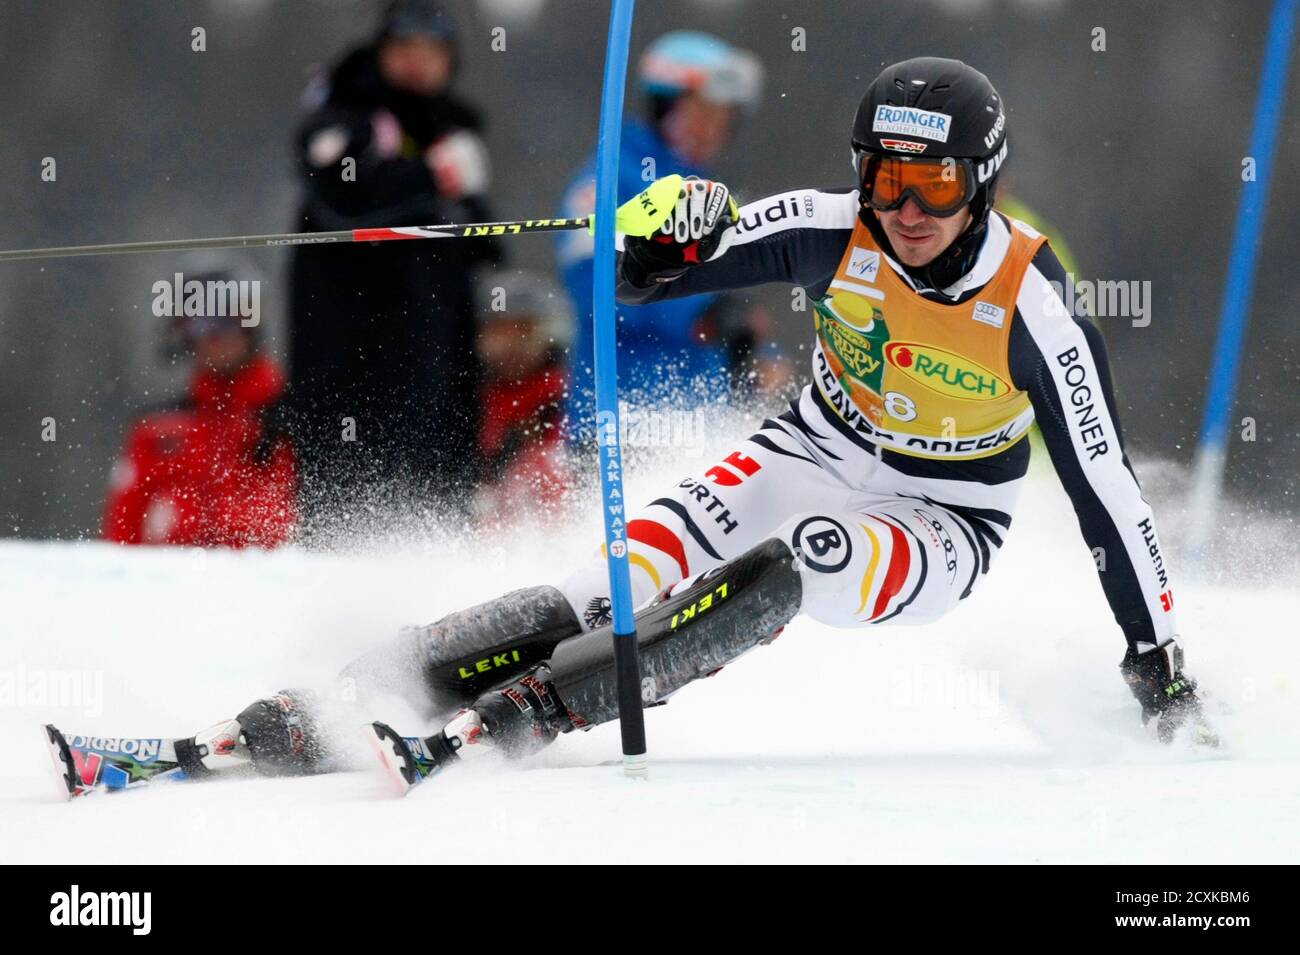 Felix Neureuther of Germany skis to the eighth best time in the first run of the men's World Cup slalom in Beaver Creek, Colorado December 8, 2011. REUTERS/Rick Wilking (UNITED STATES - Tags: SPORT SKIING) Stock Photo